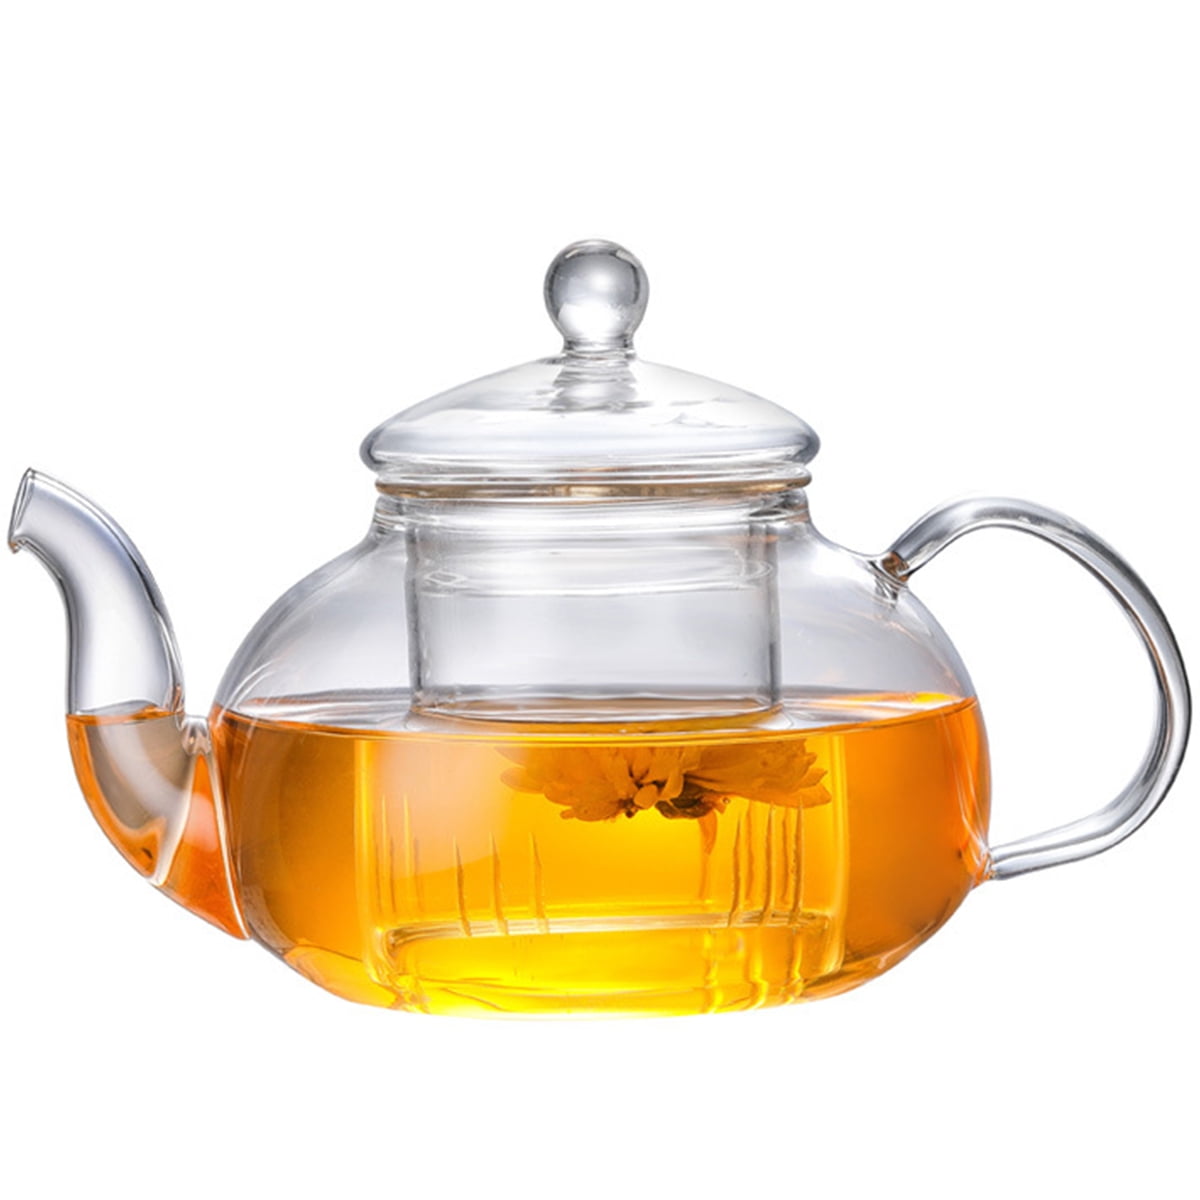 Heat Resistant Glass Teapot with Stainless Steel Strainer Filter Infuser Tea Pot 